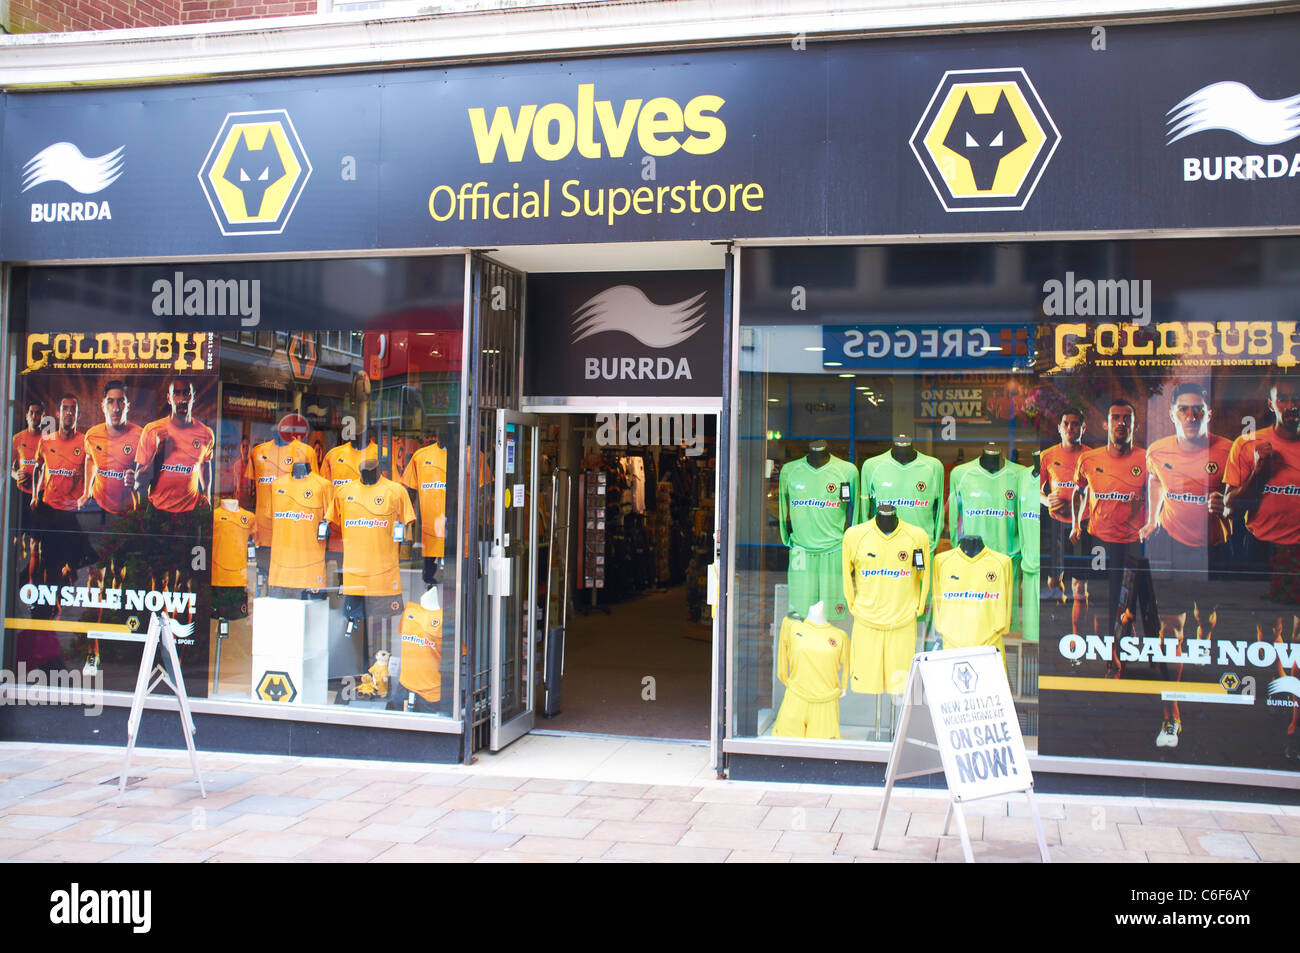 Exterior of the Wolves Official Superstore Wolverhampton UK Stock Photo